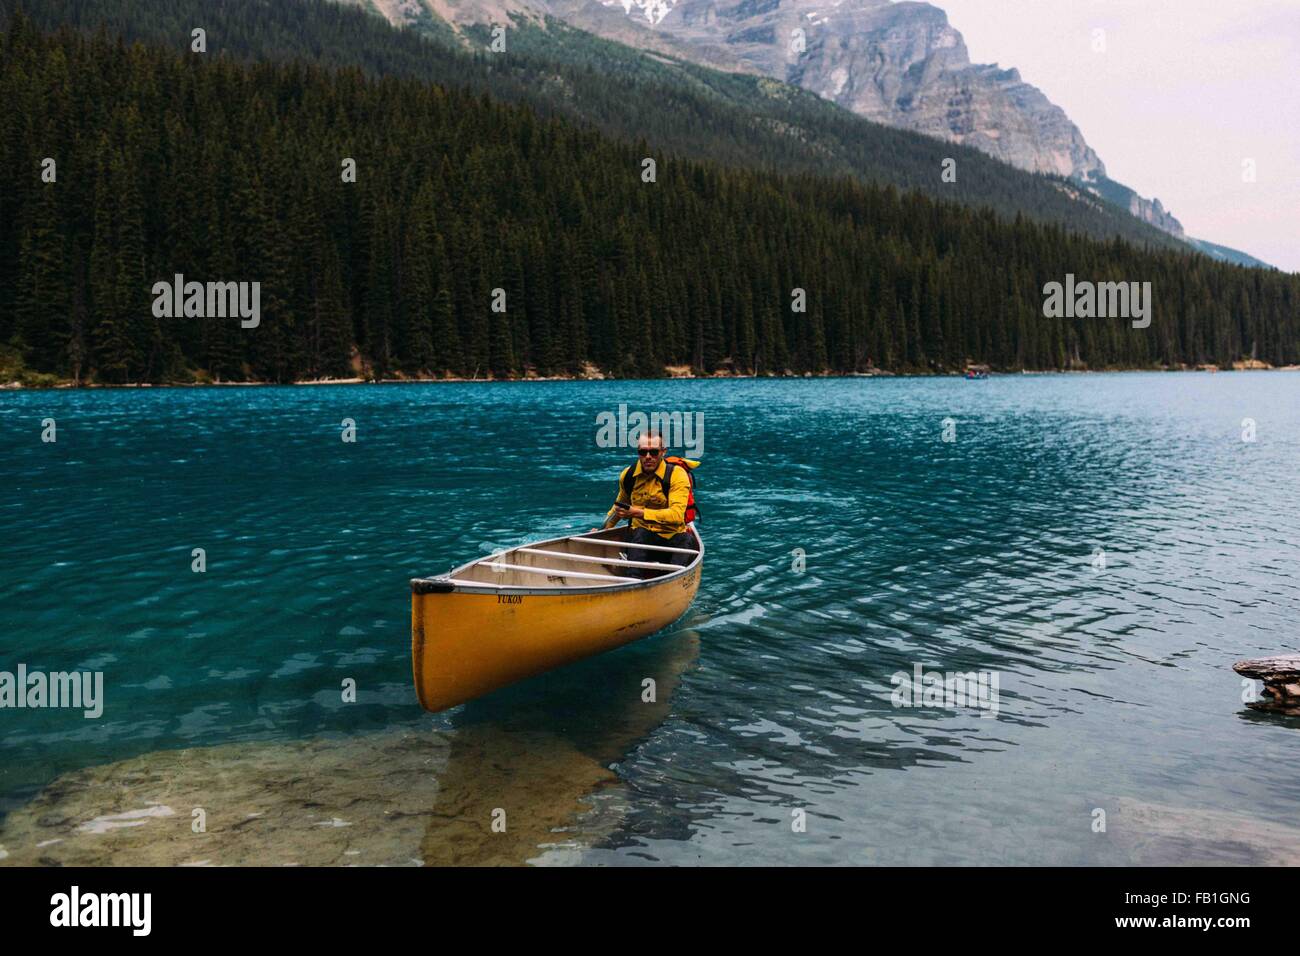 Mid adult man paddling canoe sur le lac Moraine, looking at camera, Banff National Park, Alberta Canada Banque D'Images